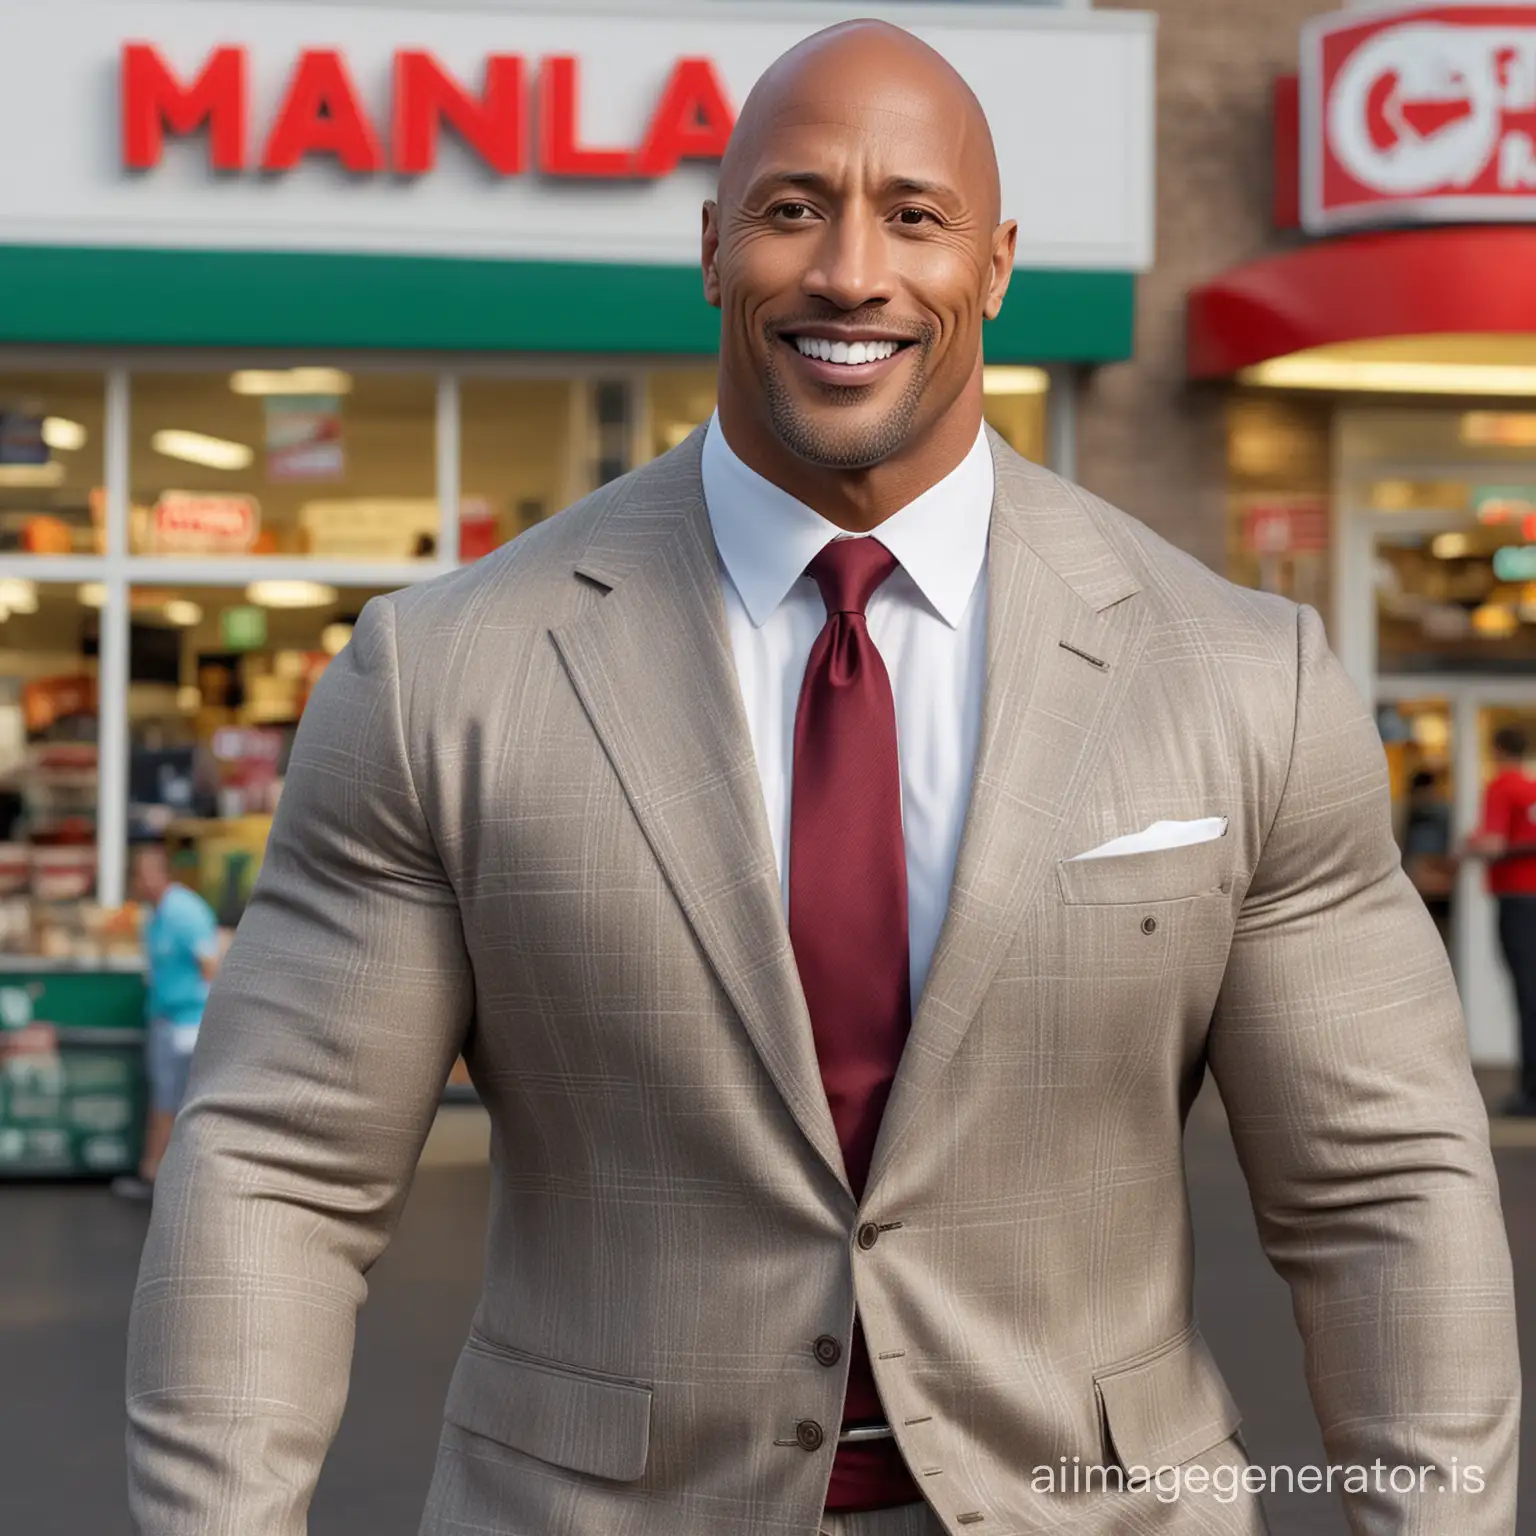 Dwayne-The-Rock-Johnson-in-Classic-McDonalds-Outfit-Posing-Confidently